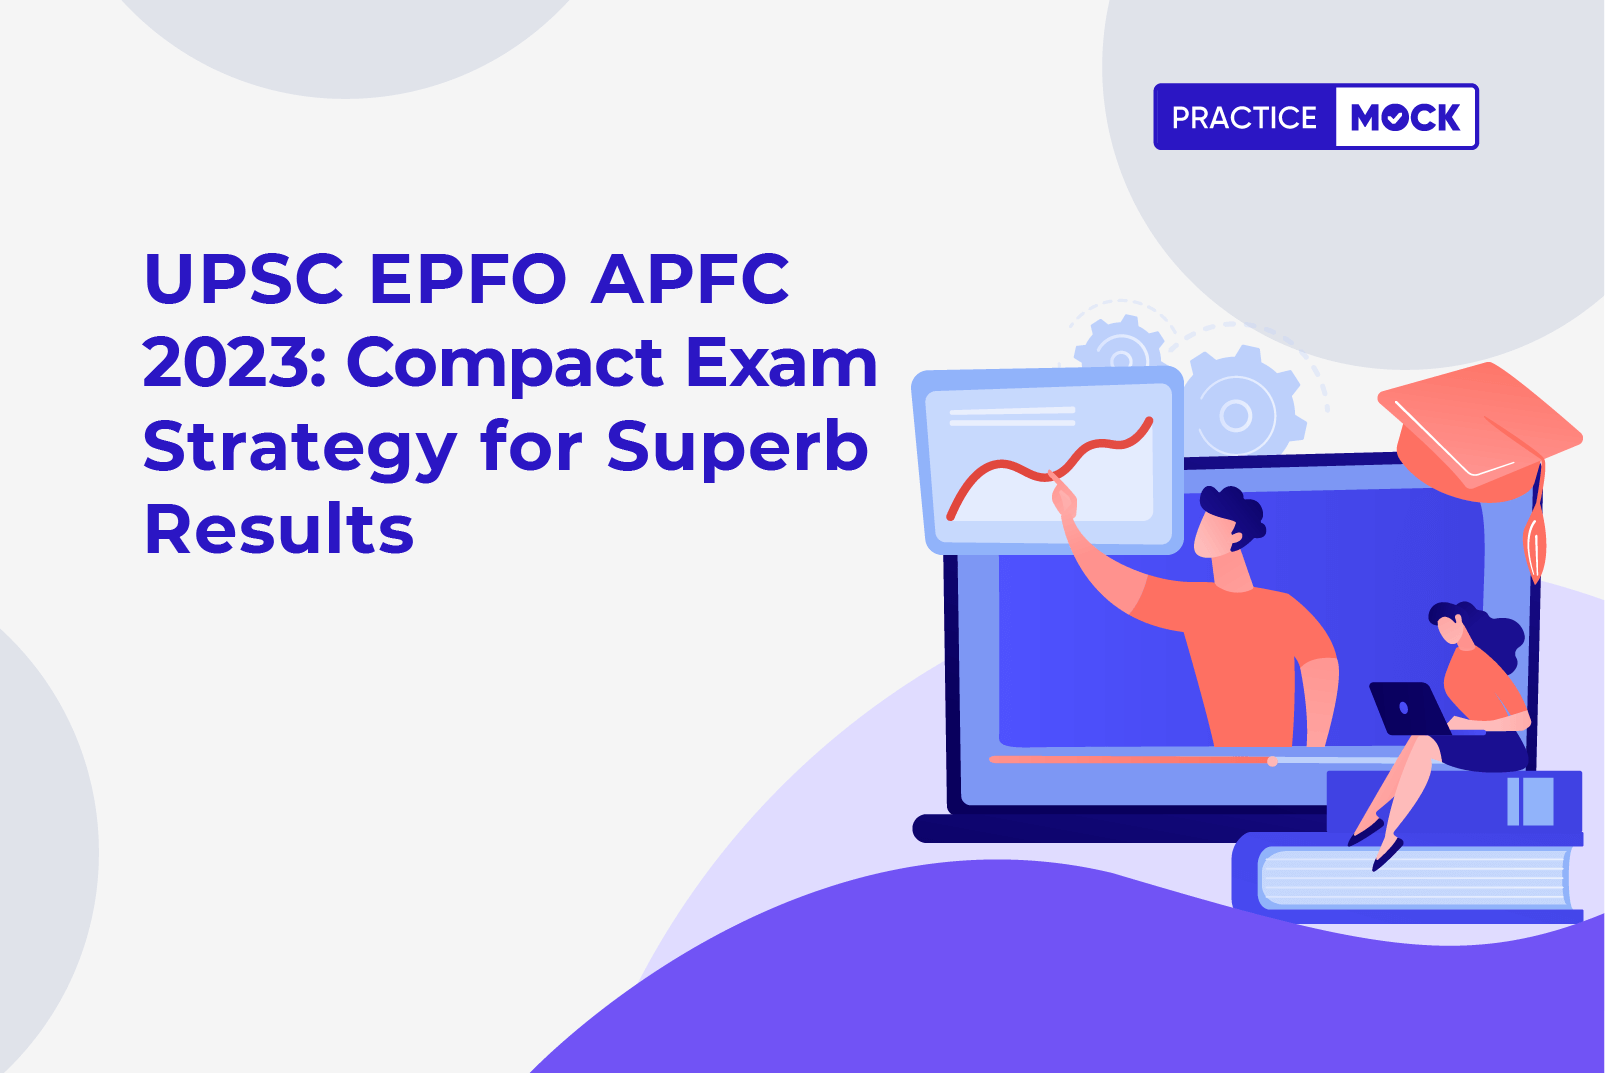 UPSC EPFO APFC 2023-Compact Exam Strategy for Superb Results